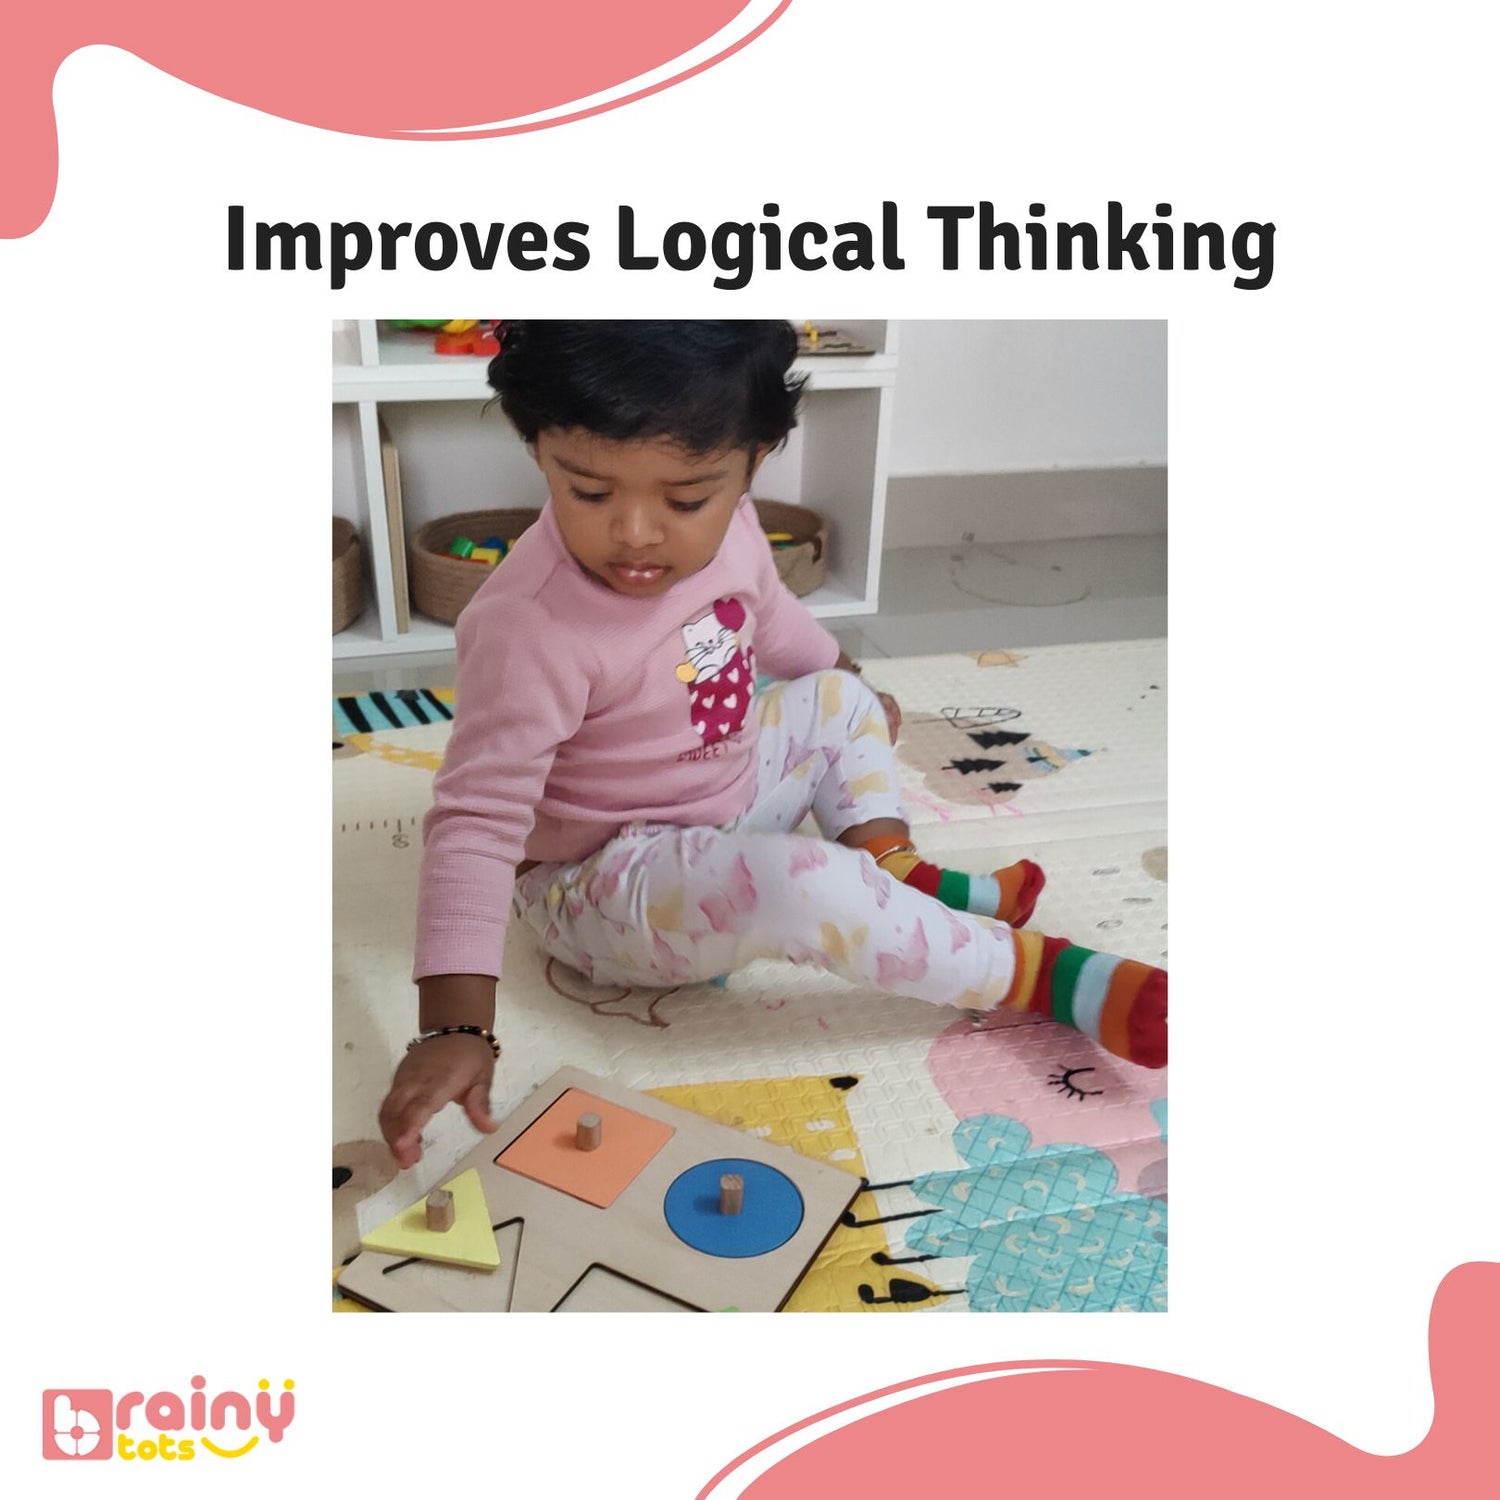 Enhance logical thinking with our 4 Shape Puzzles. These puzzles challenge learners to analyze shapes and spatial relationships, promoting problem-solving skills and logical reasoning abilities in an engaging and interactive way.